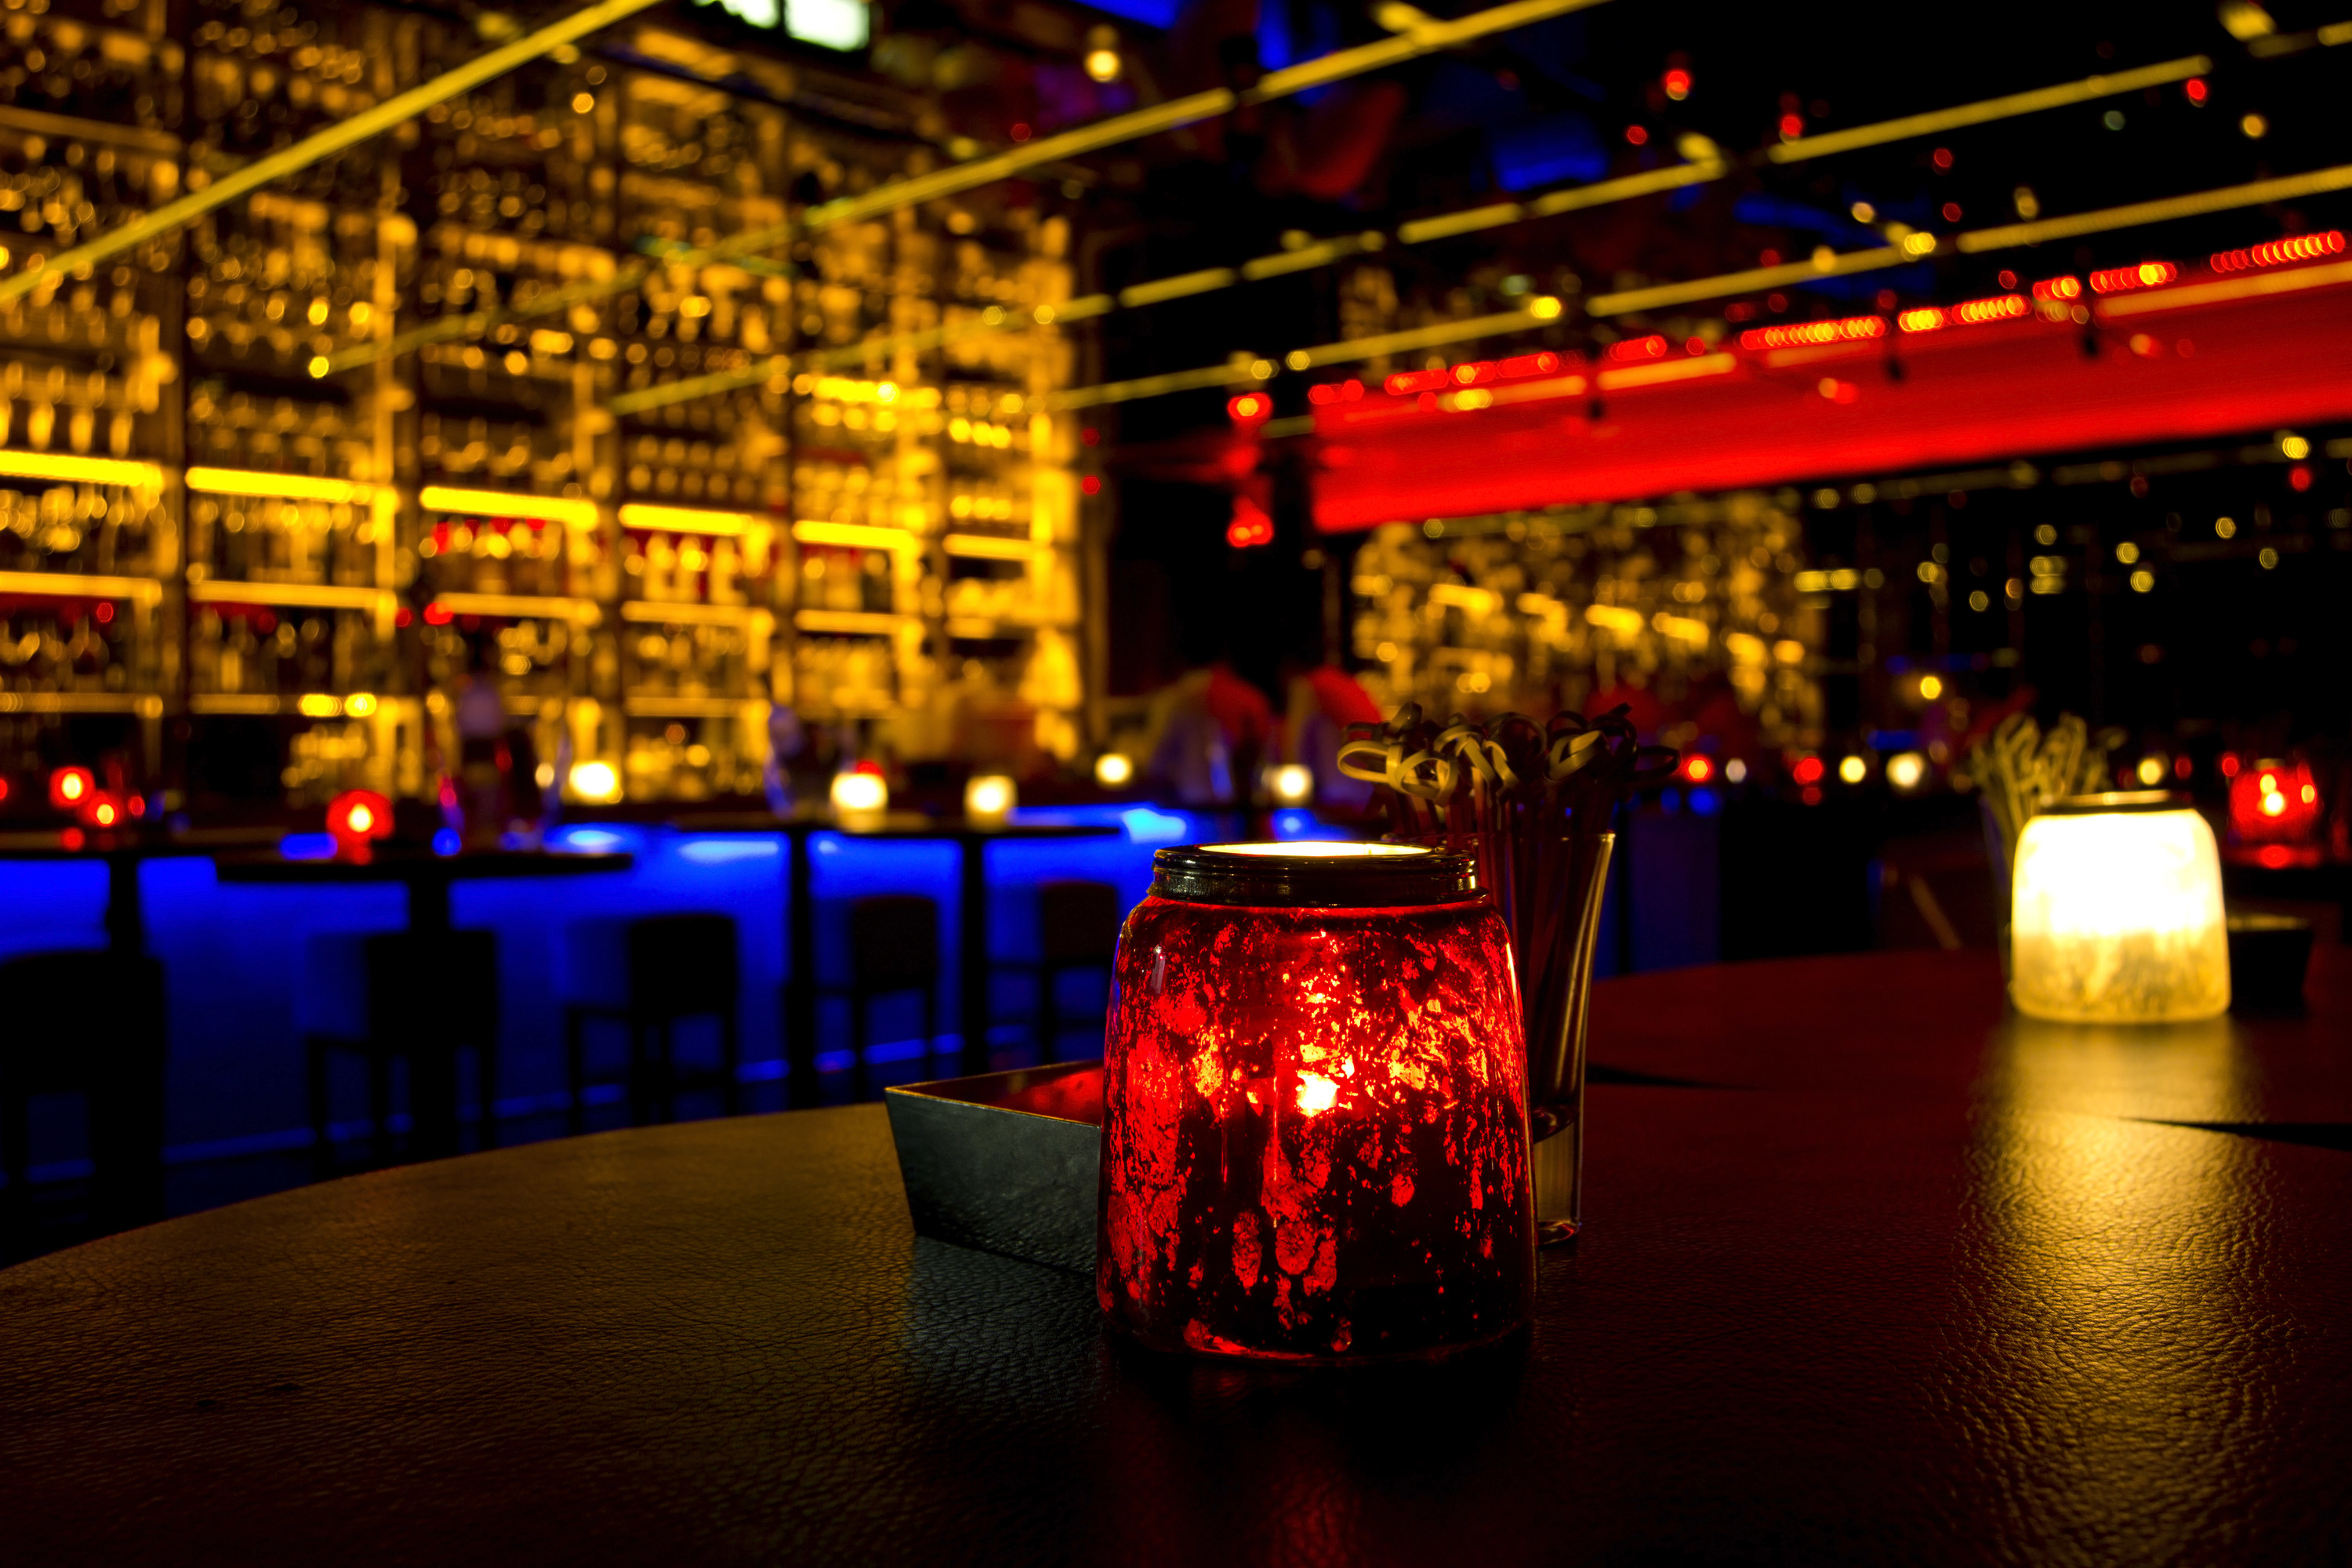 A dark restaurant setting with candles and a bar in the background